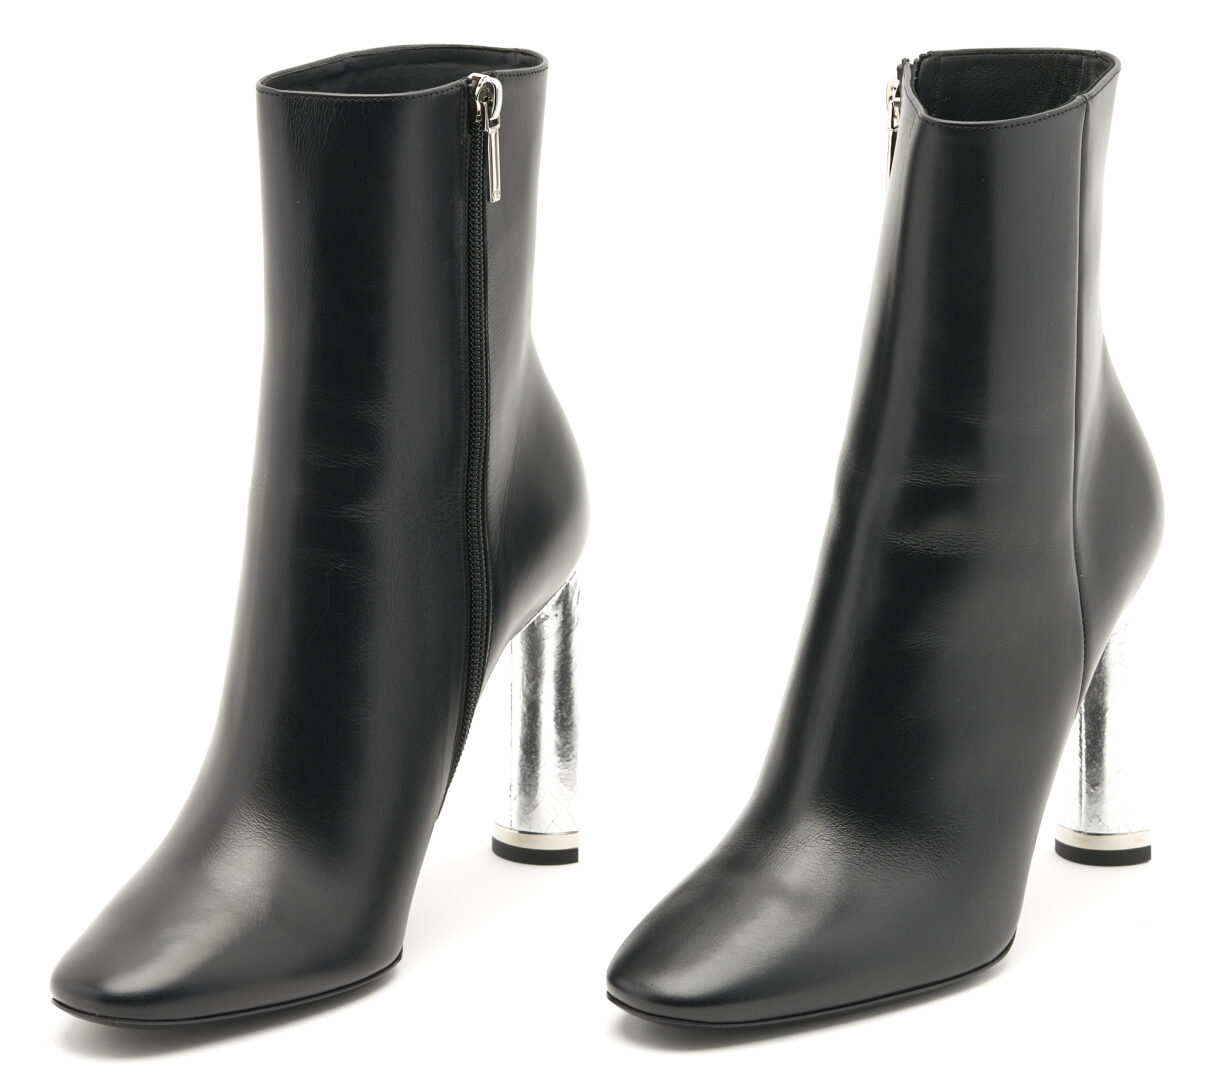 Lot 721: 3 Pairs of Christian Dior Black Ankle Boots,  incl. Huggy, Optic D, Savane